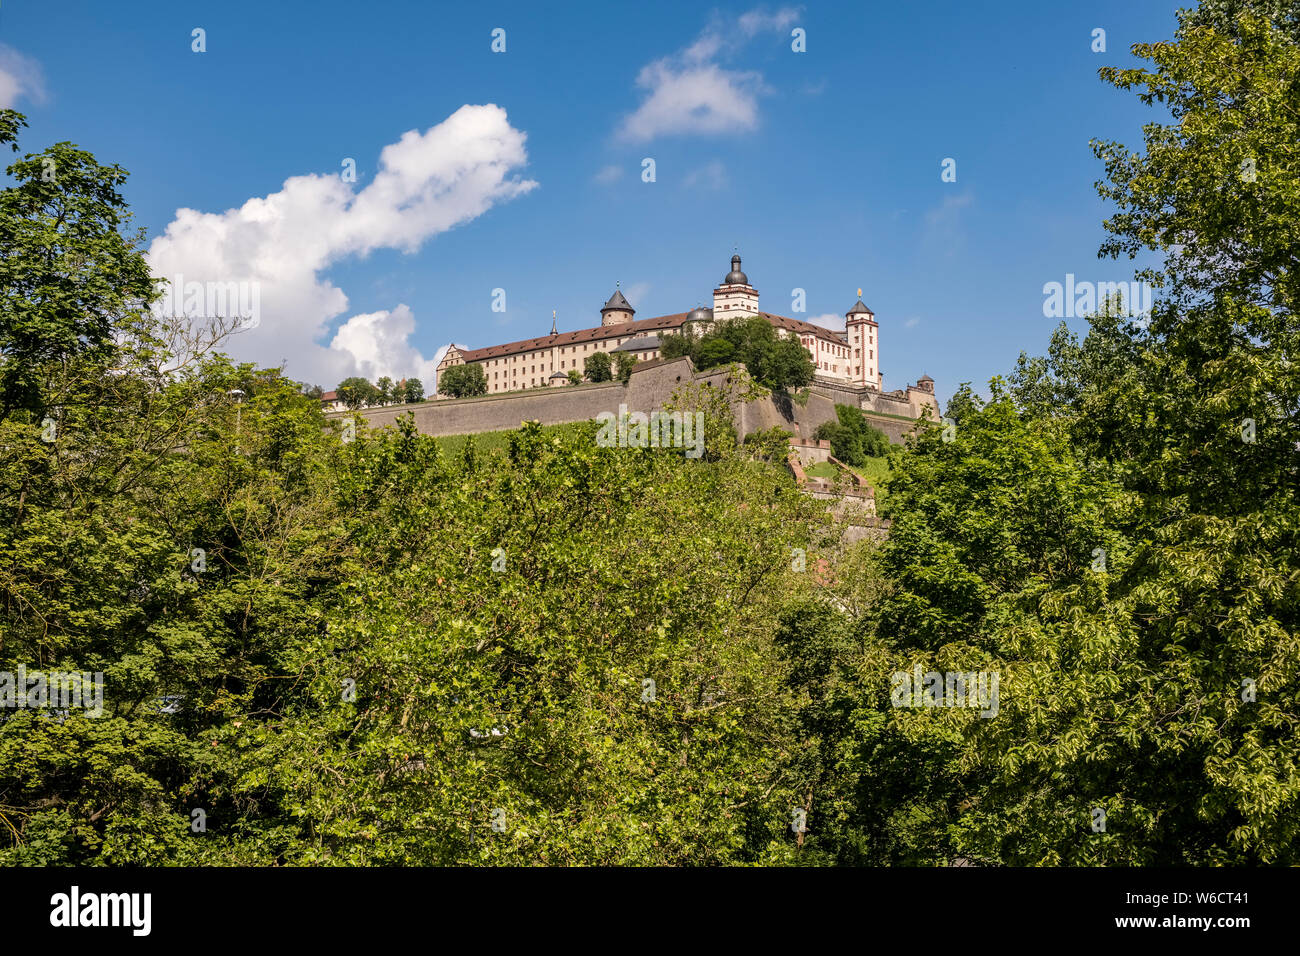 The castle Festung Marienberg is located on a hill above the town, seen through trees Stock Photo